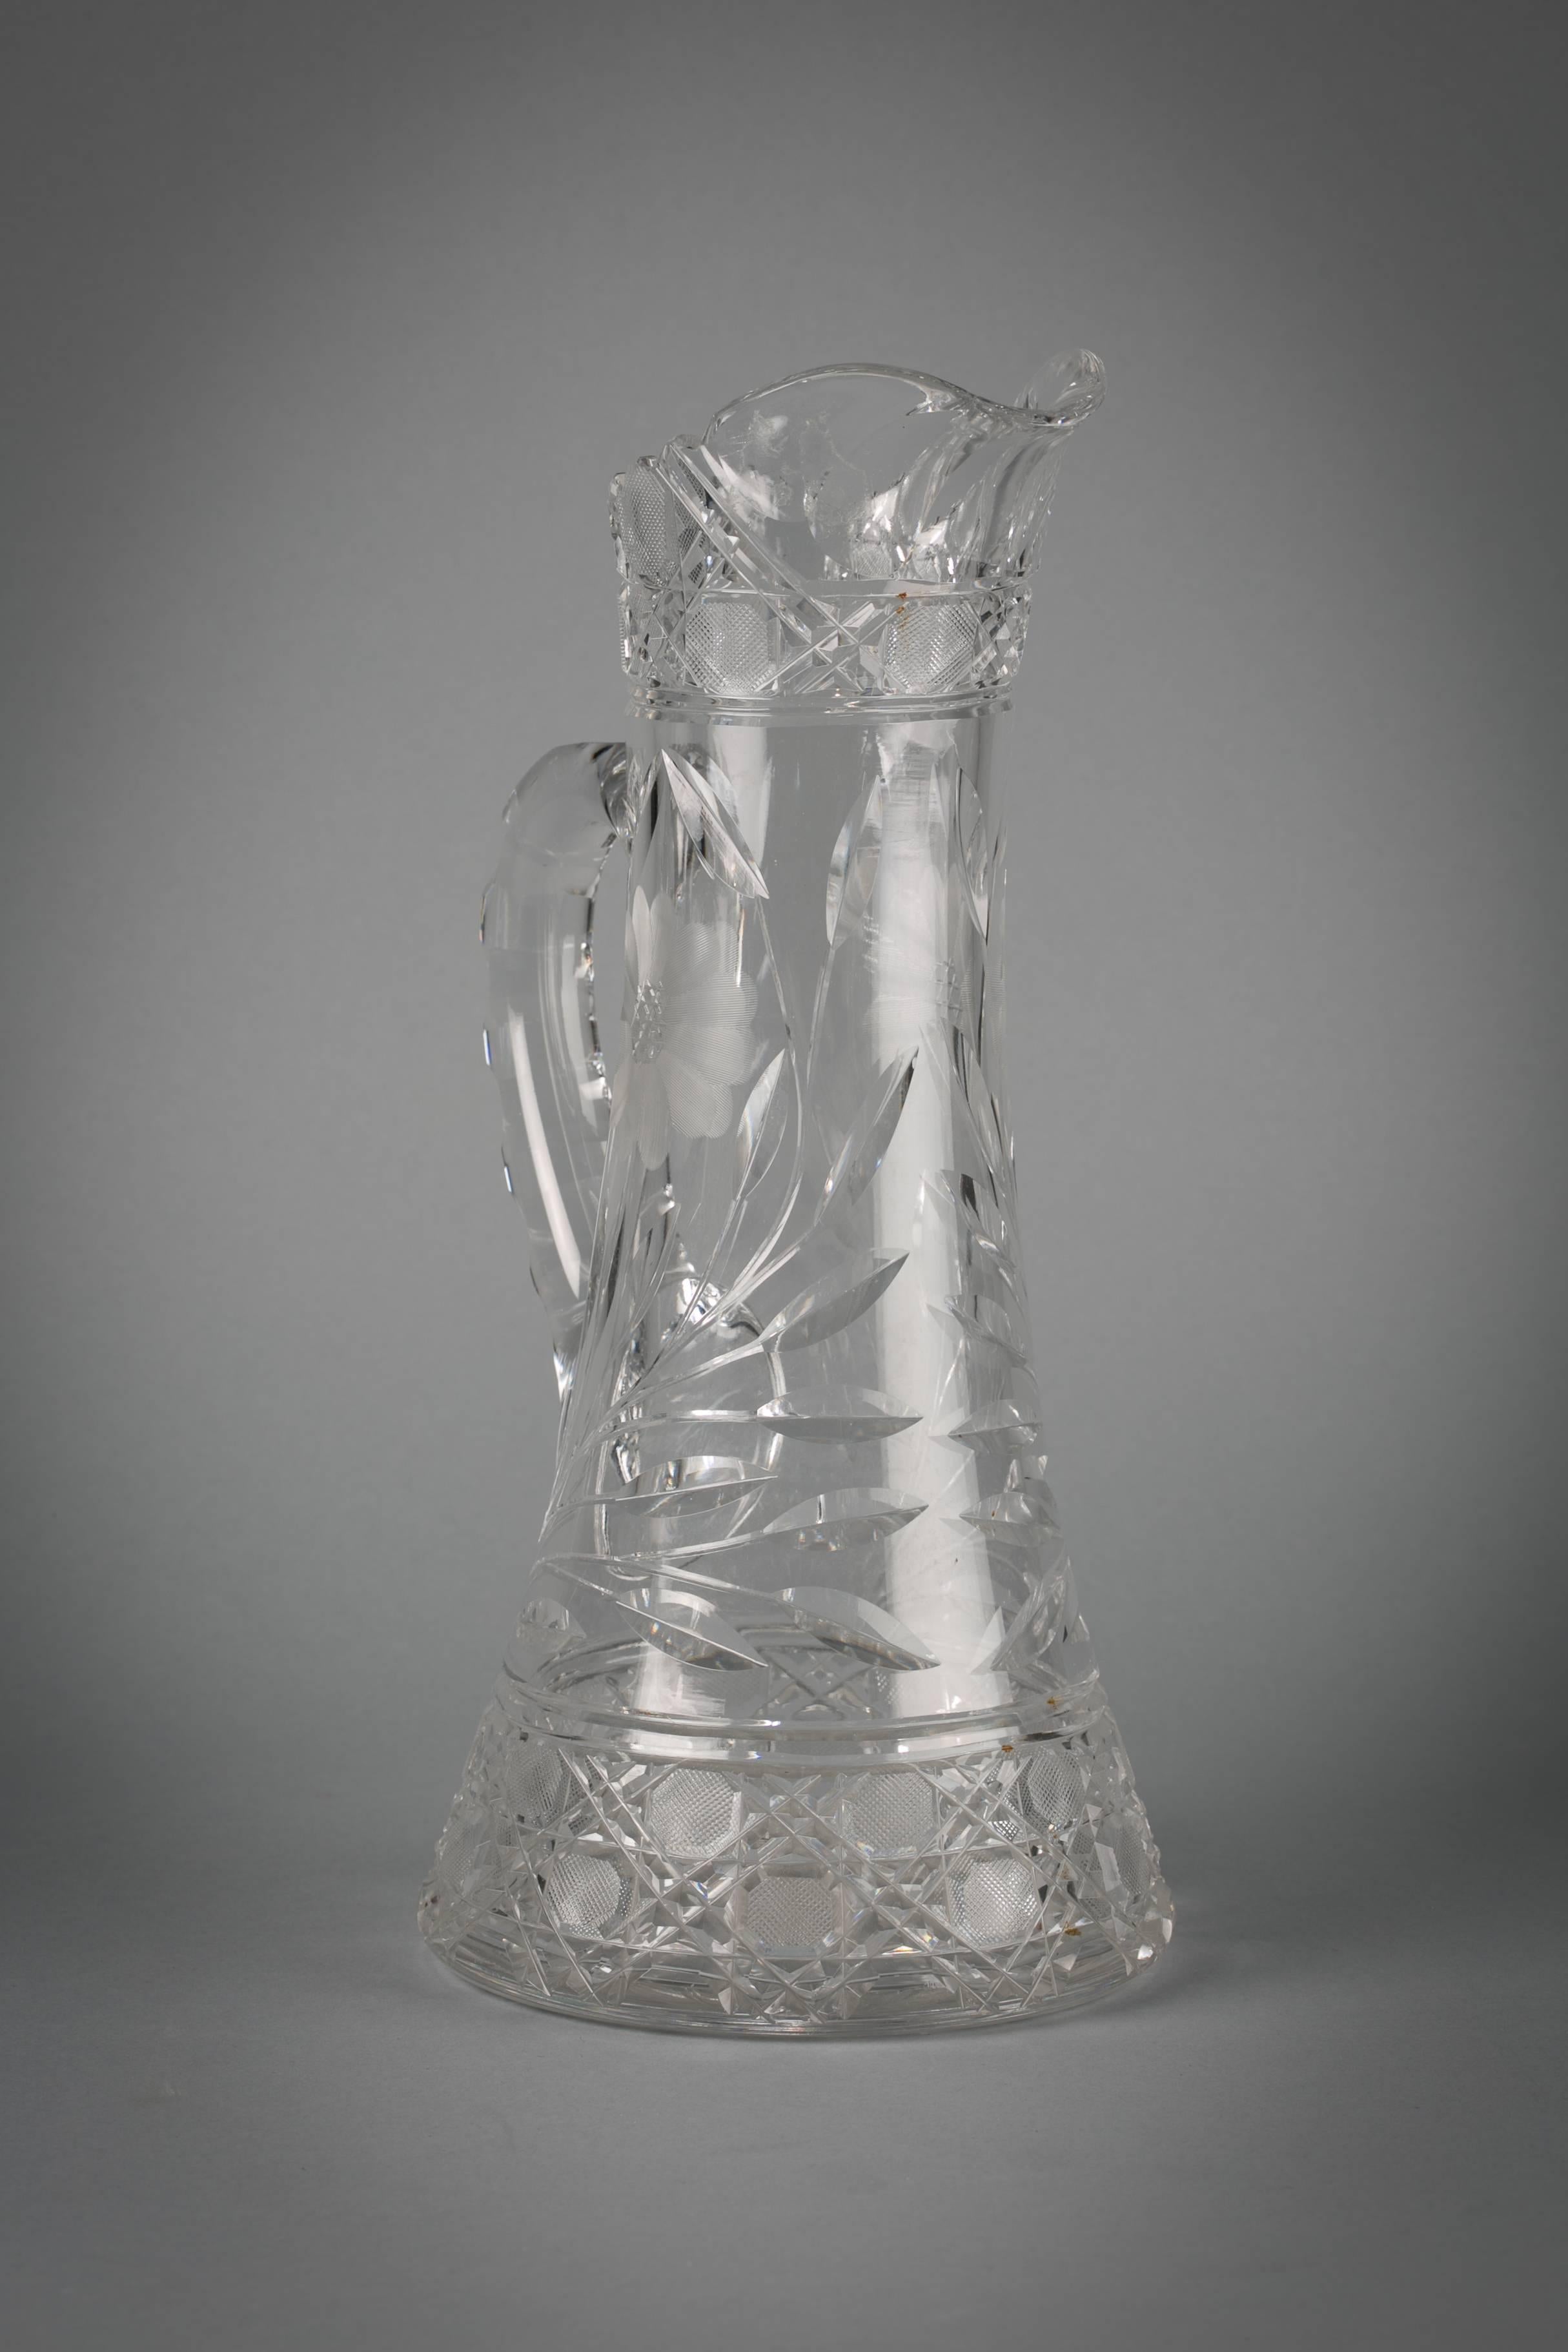 American brilliant cut and engraved glass pitcher with floral decoration, circa 1900.